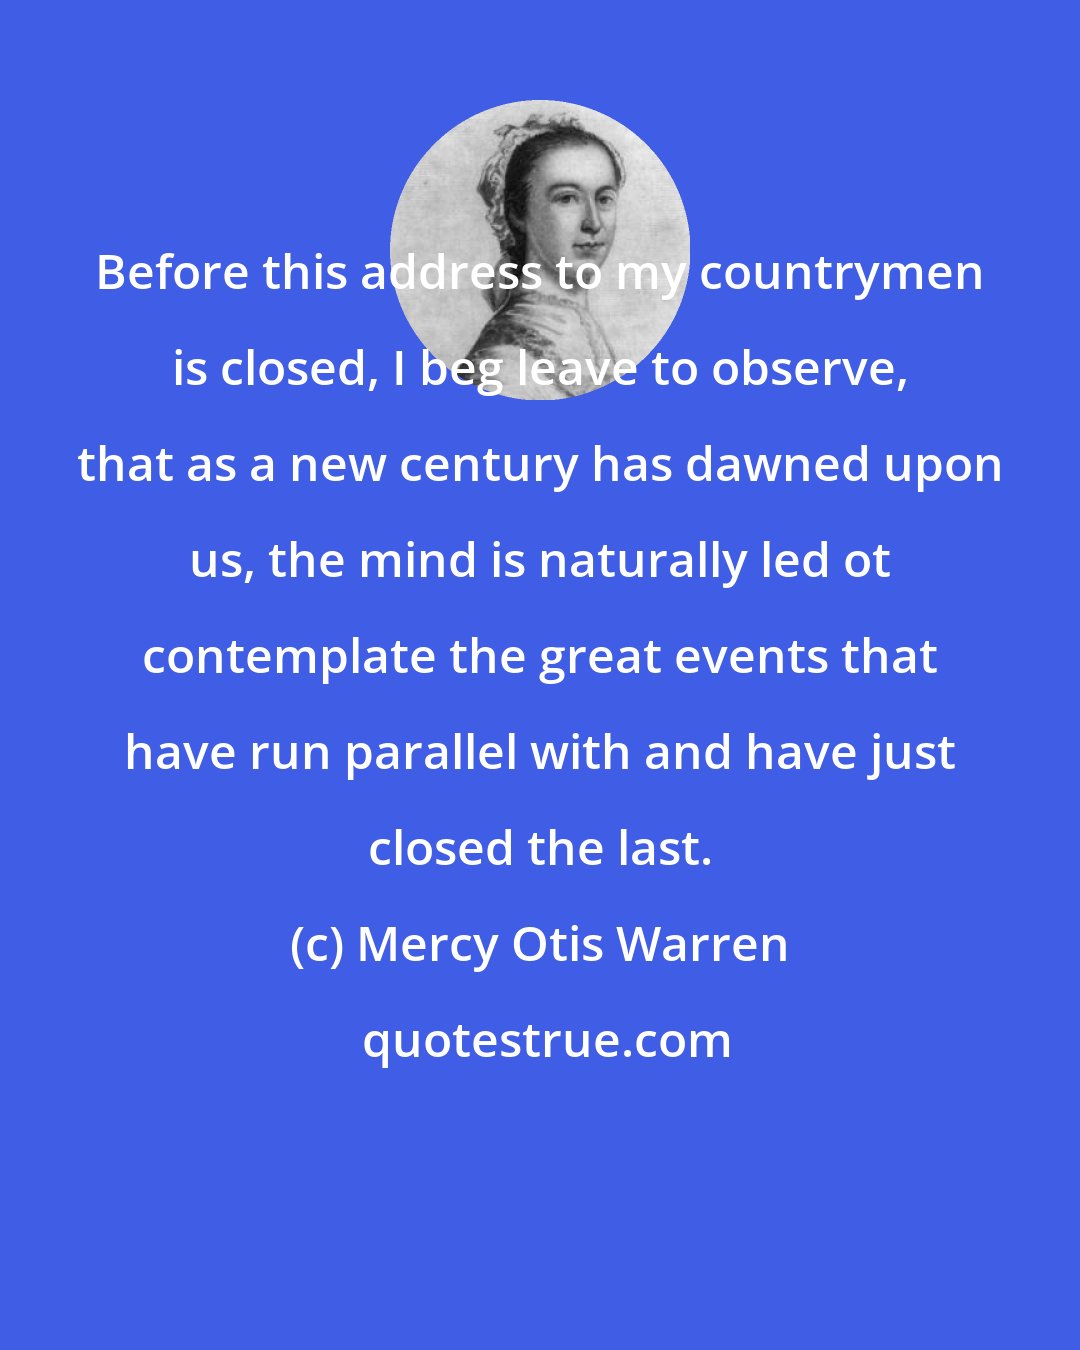 Mercy Otis Warren: Before this address to my countrymen is closed, I beg leave to observe, that as a new century has dawned upon us, the mind is naturally led ot contemplate the great events that have run parallel with and have just closed the last.